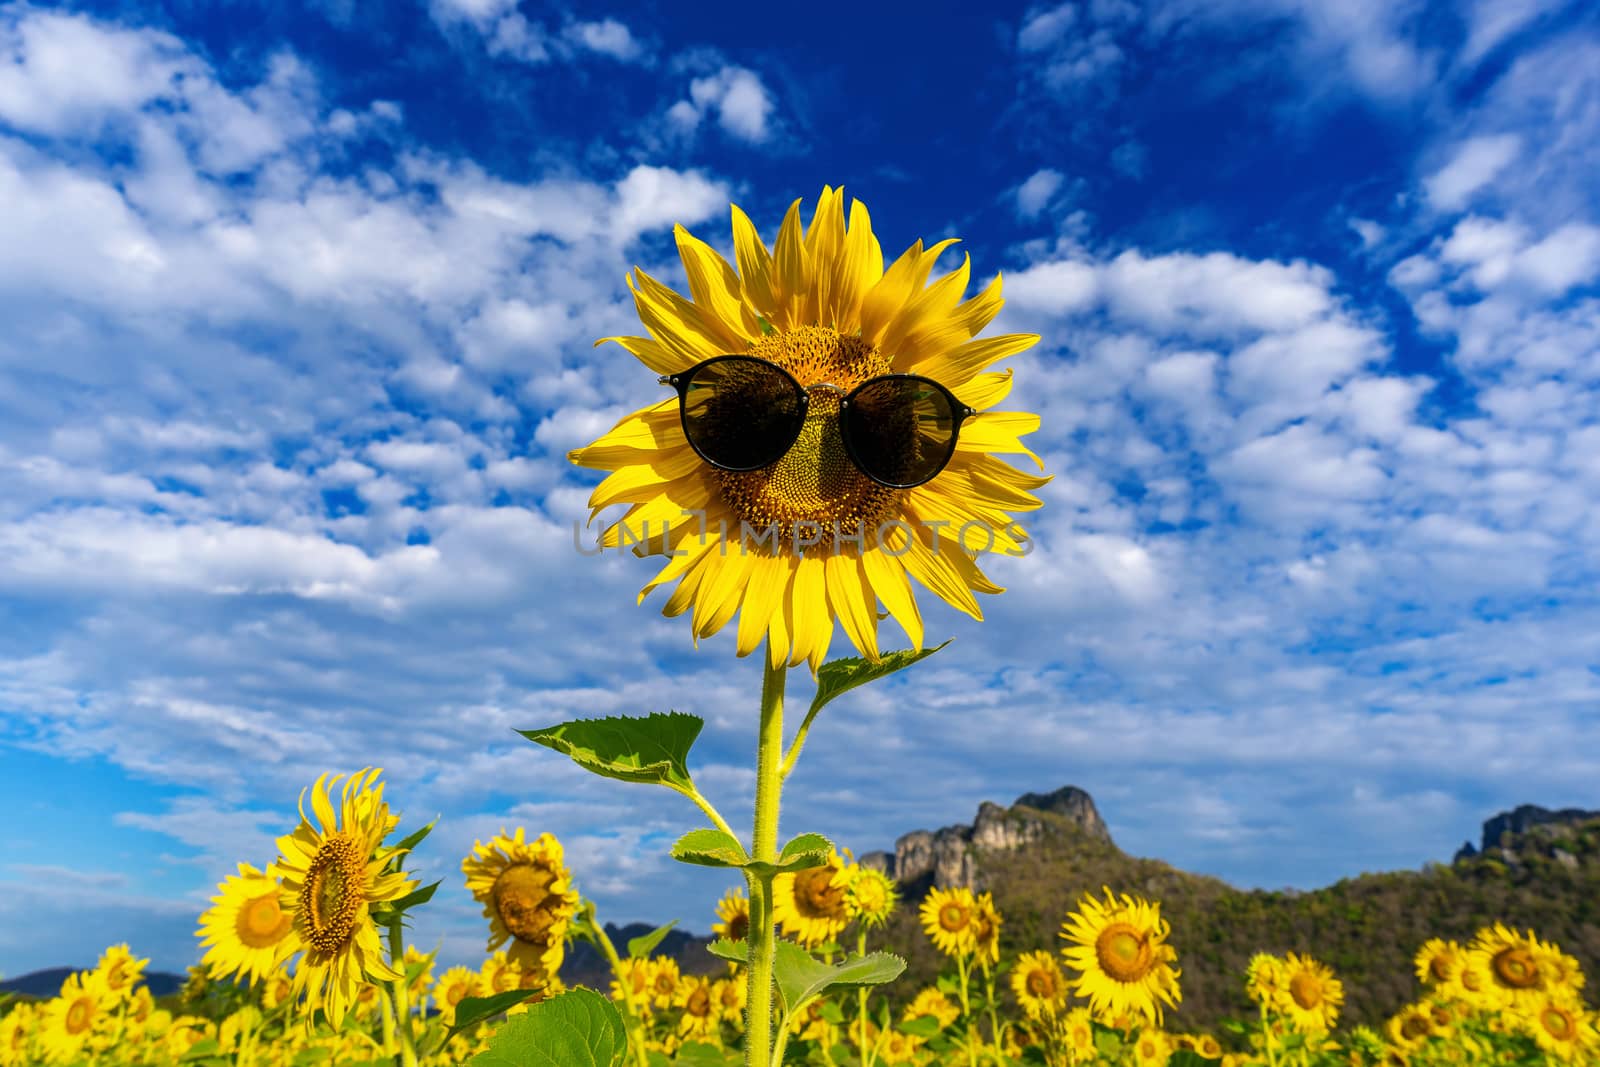 sunflowers with sunglass by gutarphotoghaphy